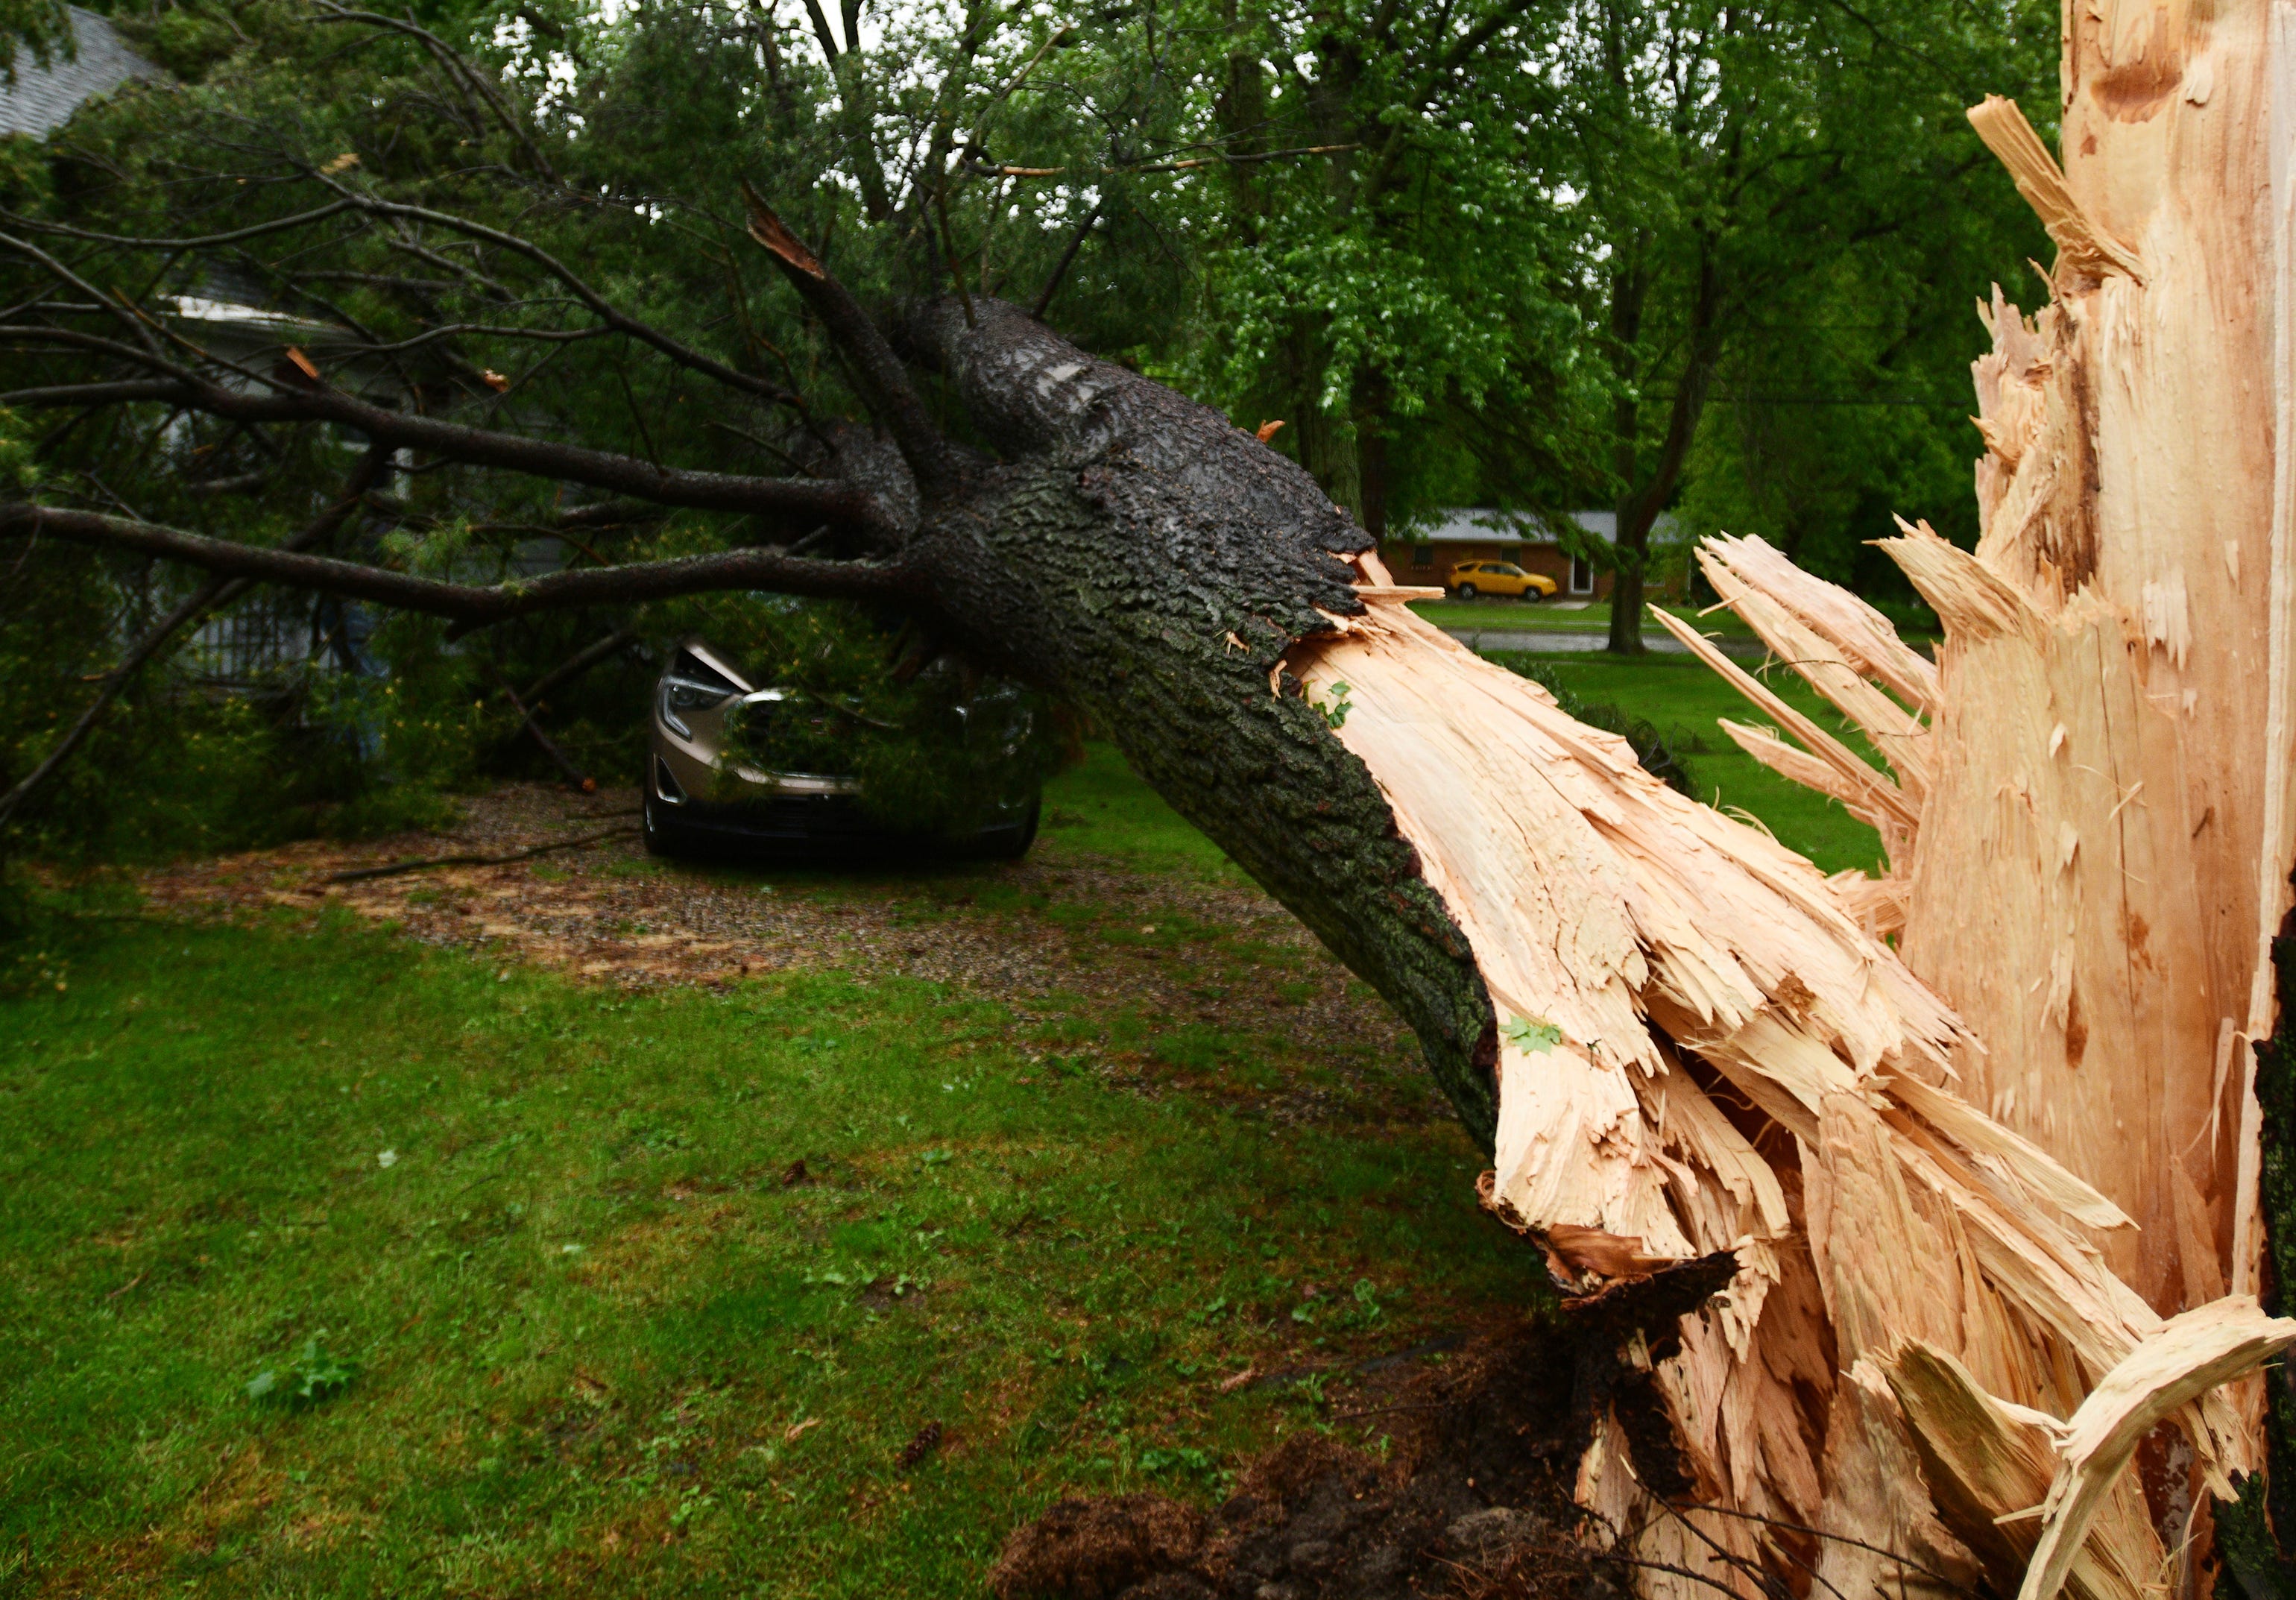 Storm damage is seen at a home on Main Street in Concord, Mich., on Wednesday, June 10, 2020. Strong storms with heavy winds swept across Jackson County causing power outages, downing trees and damaging property.